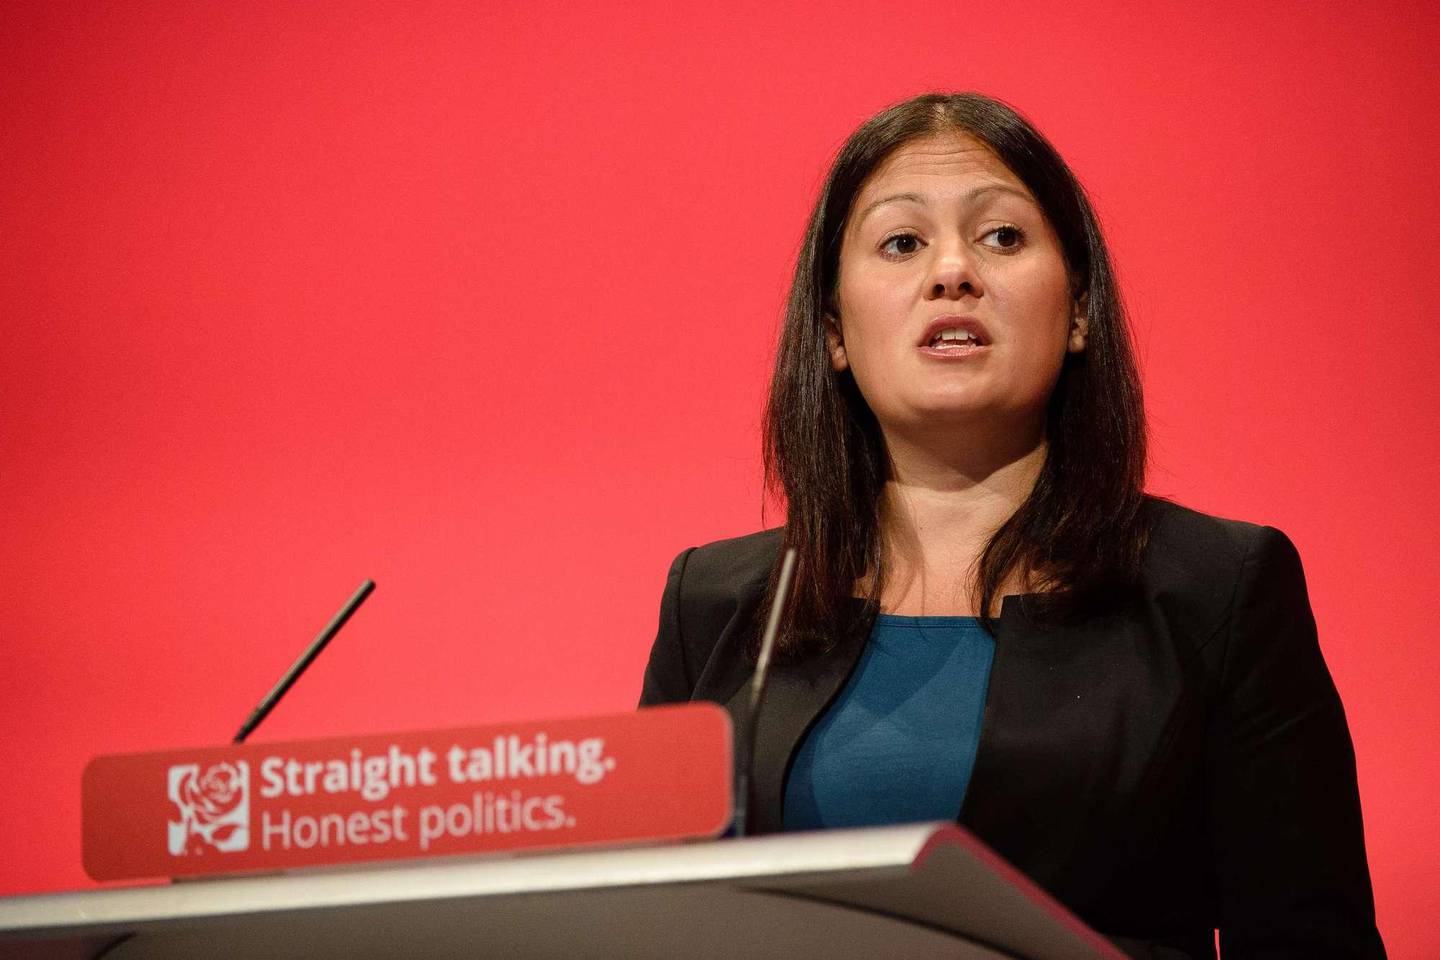 British Shadow Secretary of State for Energy and Climate Change Lisa Nandy addresses delegates on the third day of the annual Labour Party Conference in Brighton, south east England, on September 29, 2015. AFP PHOTO / LEON NEAL